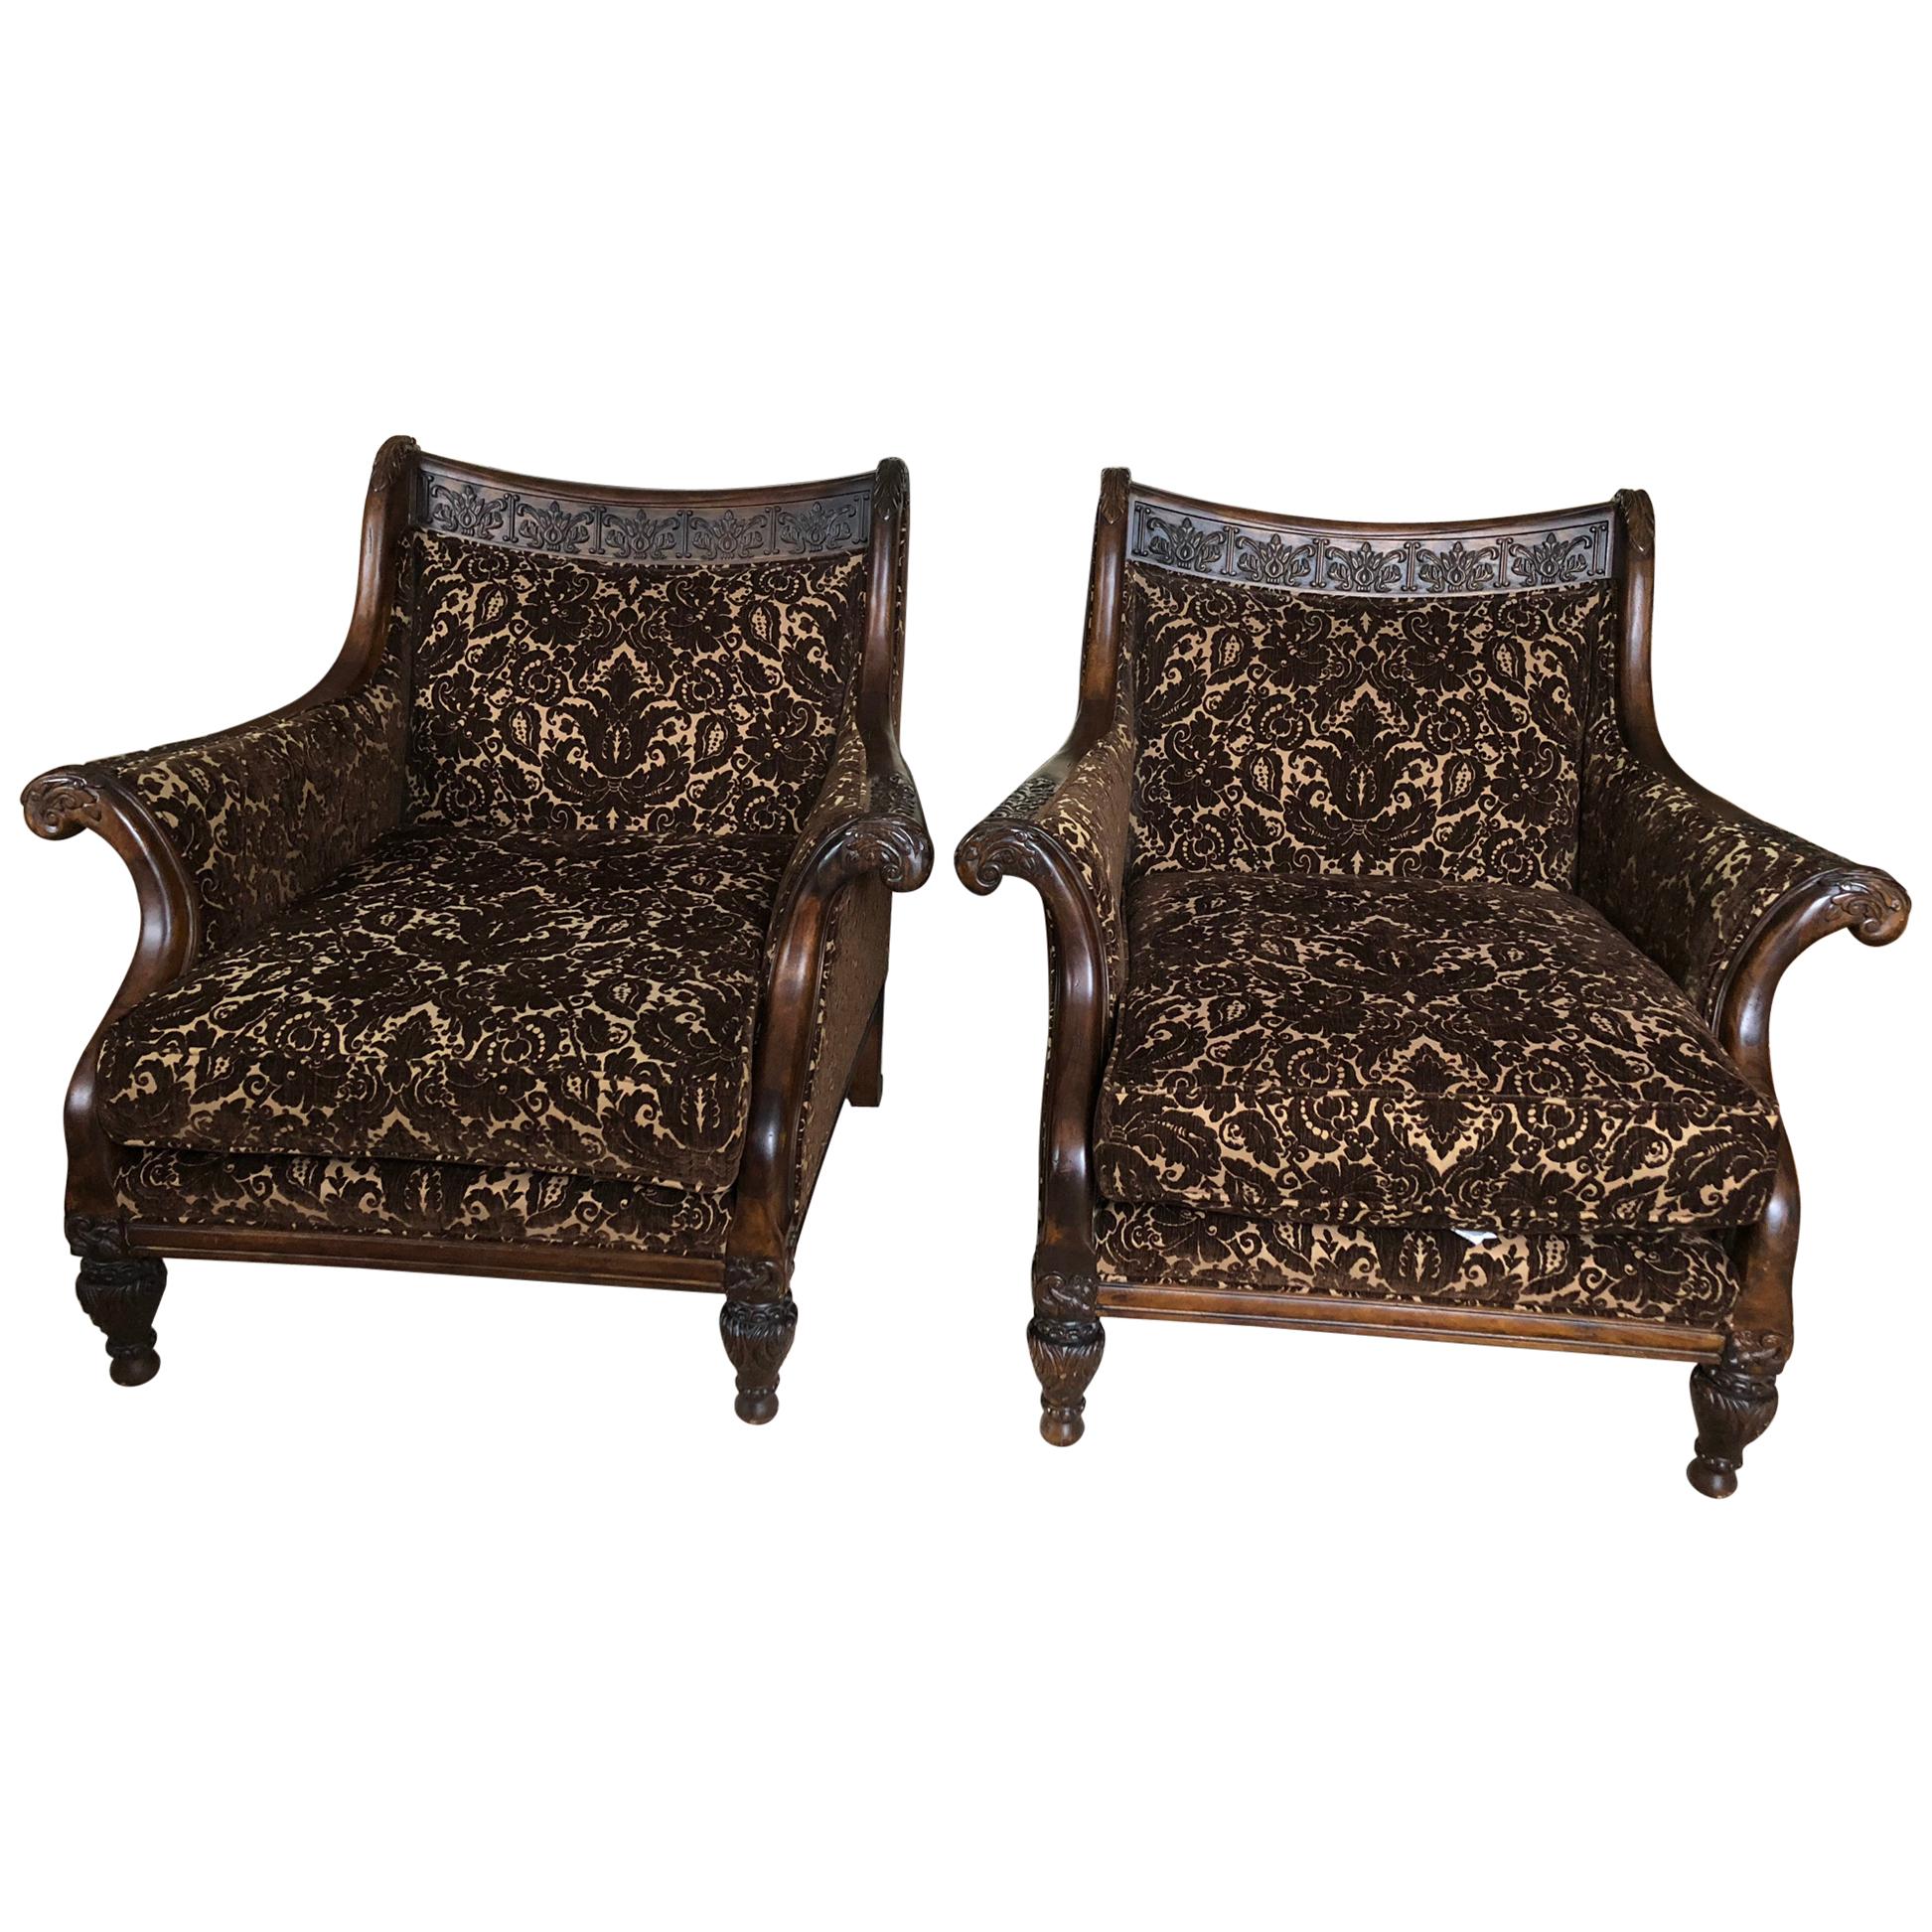 Pair of Classically Beautiful Carved Walnut and Upholstered Club Chairs